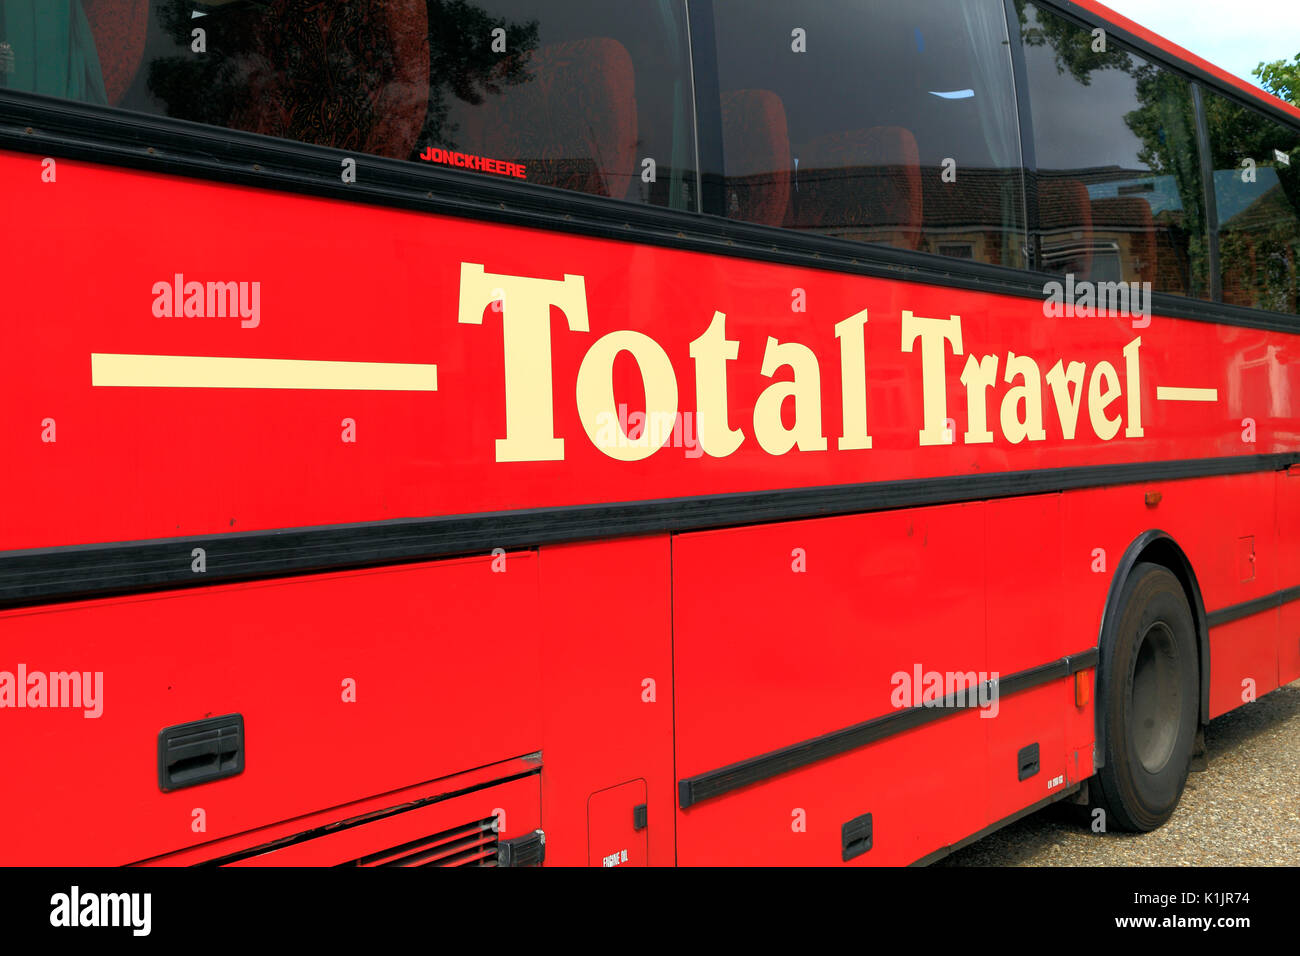 Total Travel, coach, coaches, day trips, trip, excursion, excursions, company, companies, travel, transport, England, UK. Stock Photo